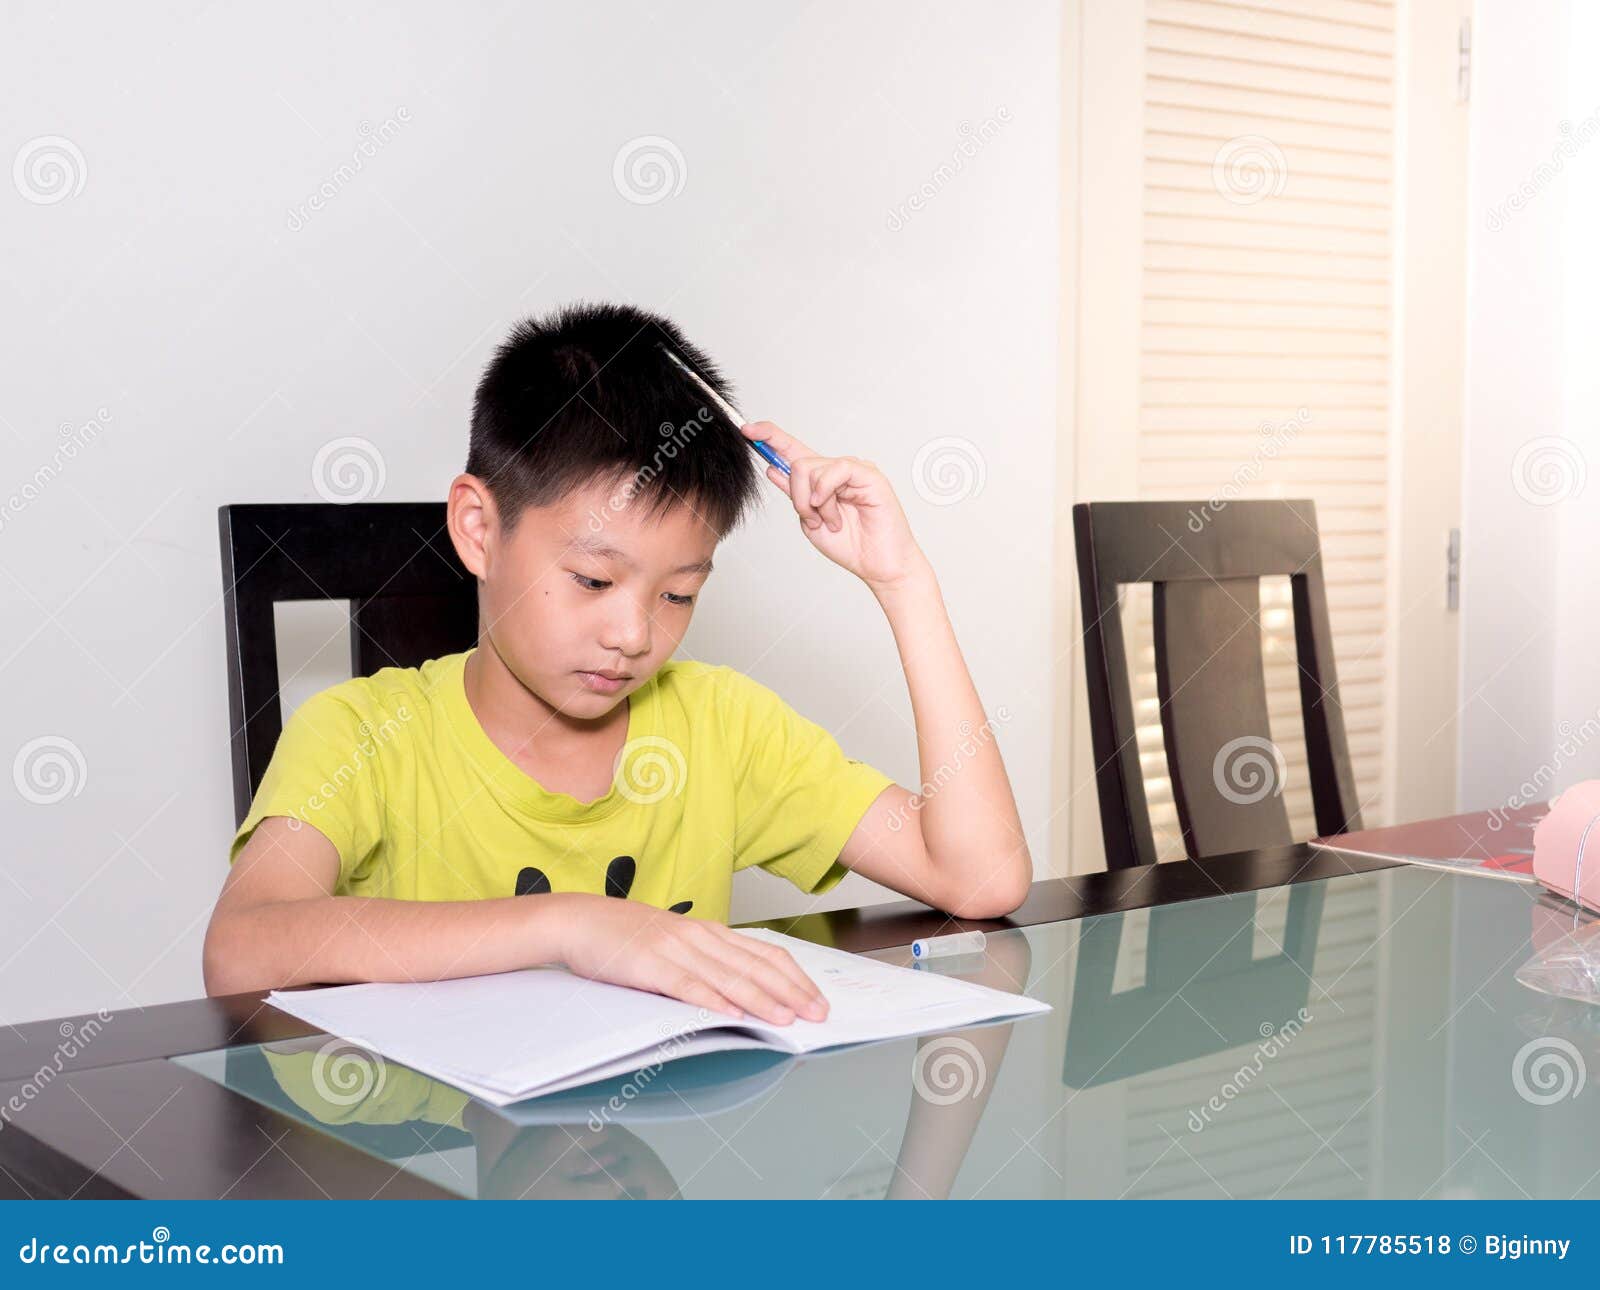 Little asia. Boy studying on the Table PNG. Boys study Desk. Student boy the Table Side view. Маленькими азиатскими ручками работать надо.